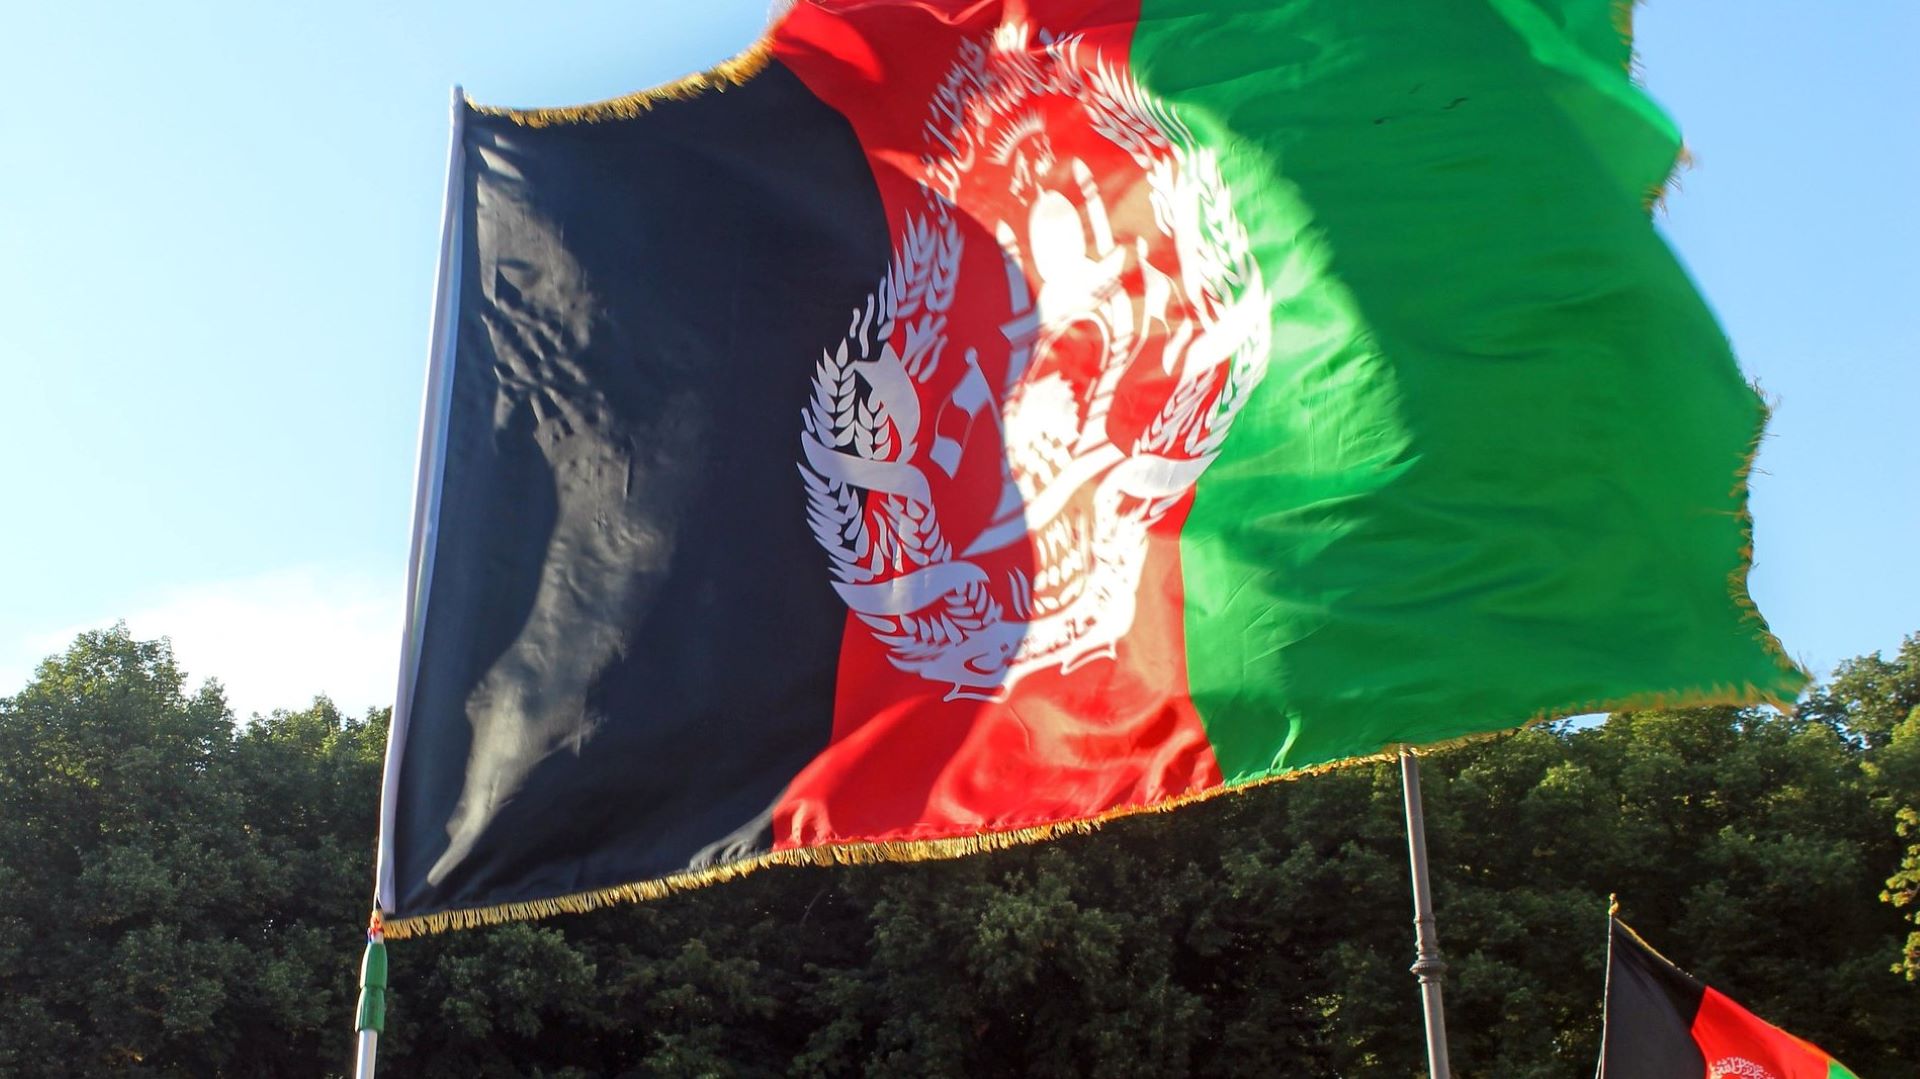 The Taliban takeover of Afghanistan represents a tragedy for millions of people. What can be done to help secure the rights of Afghan citizens?